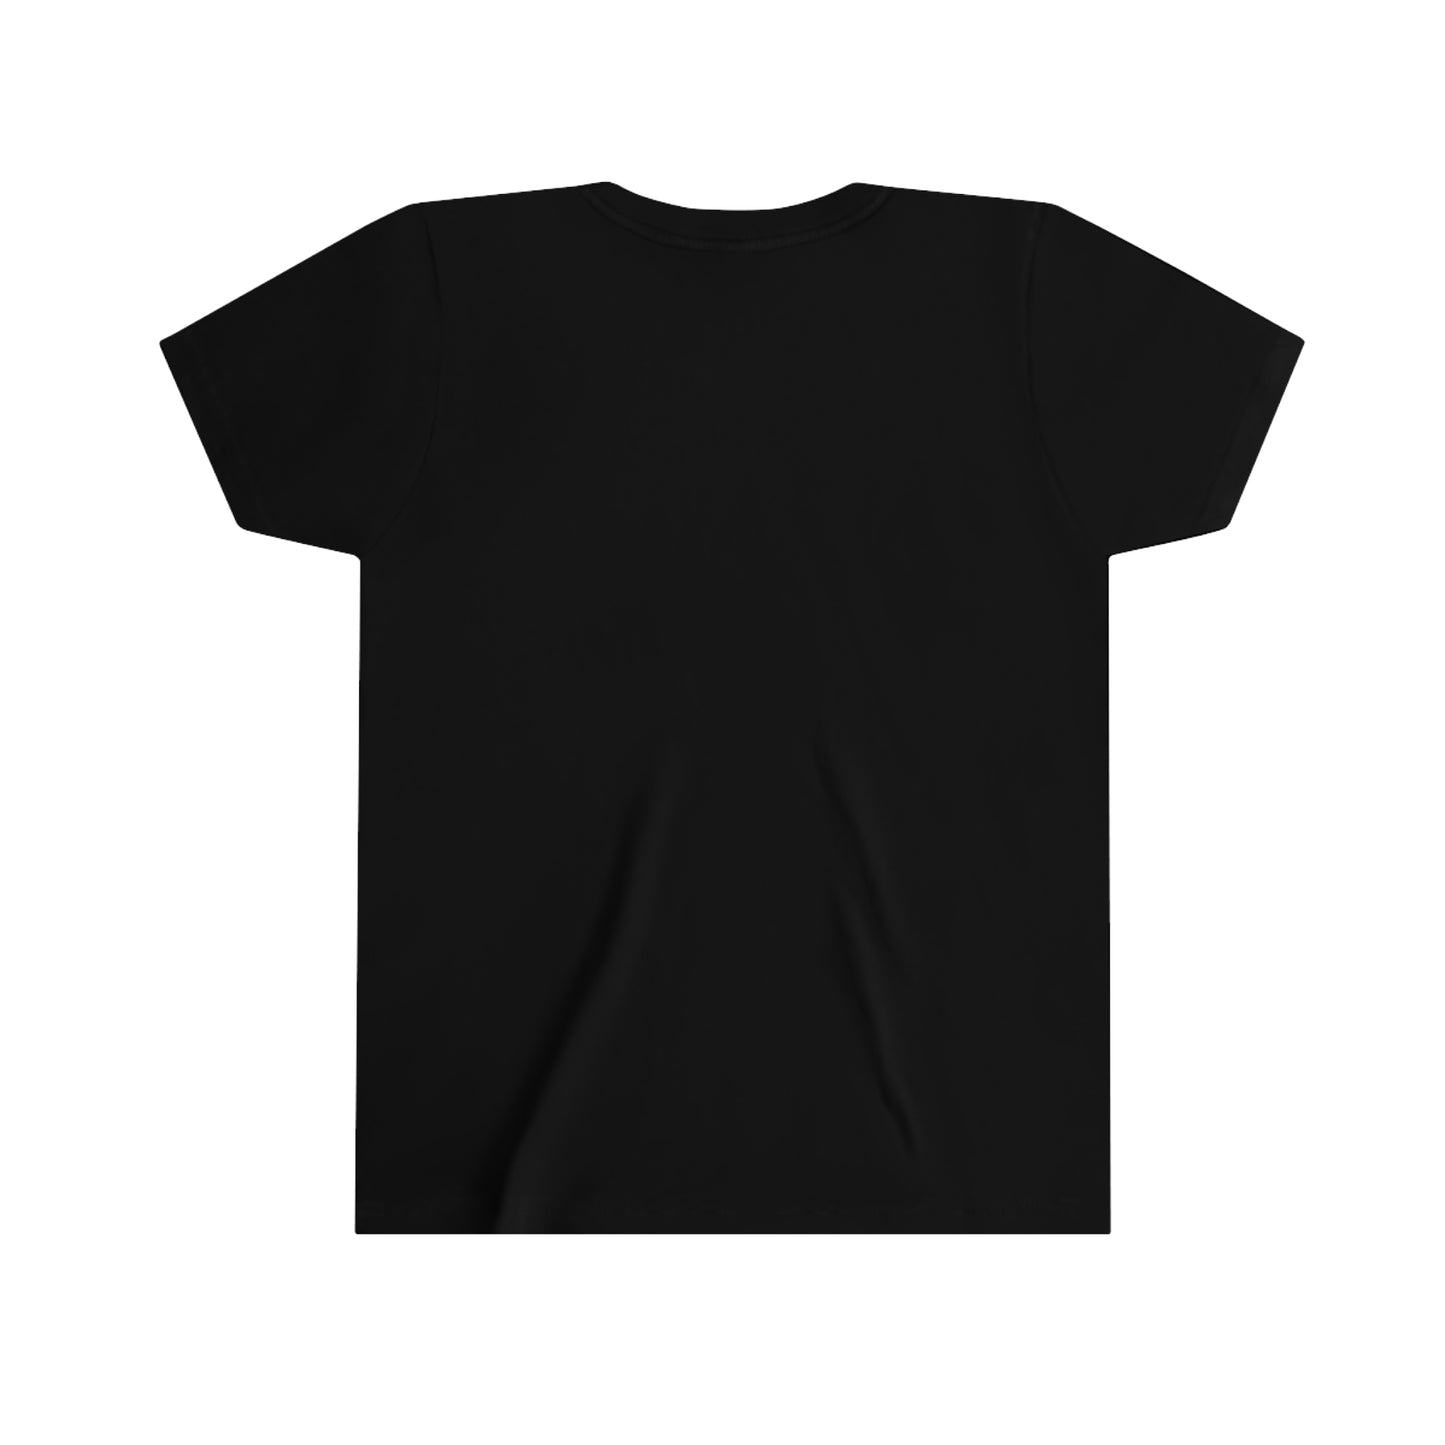 Small but Fearless Youth Short Sleeve Tee